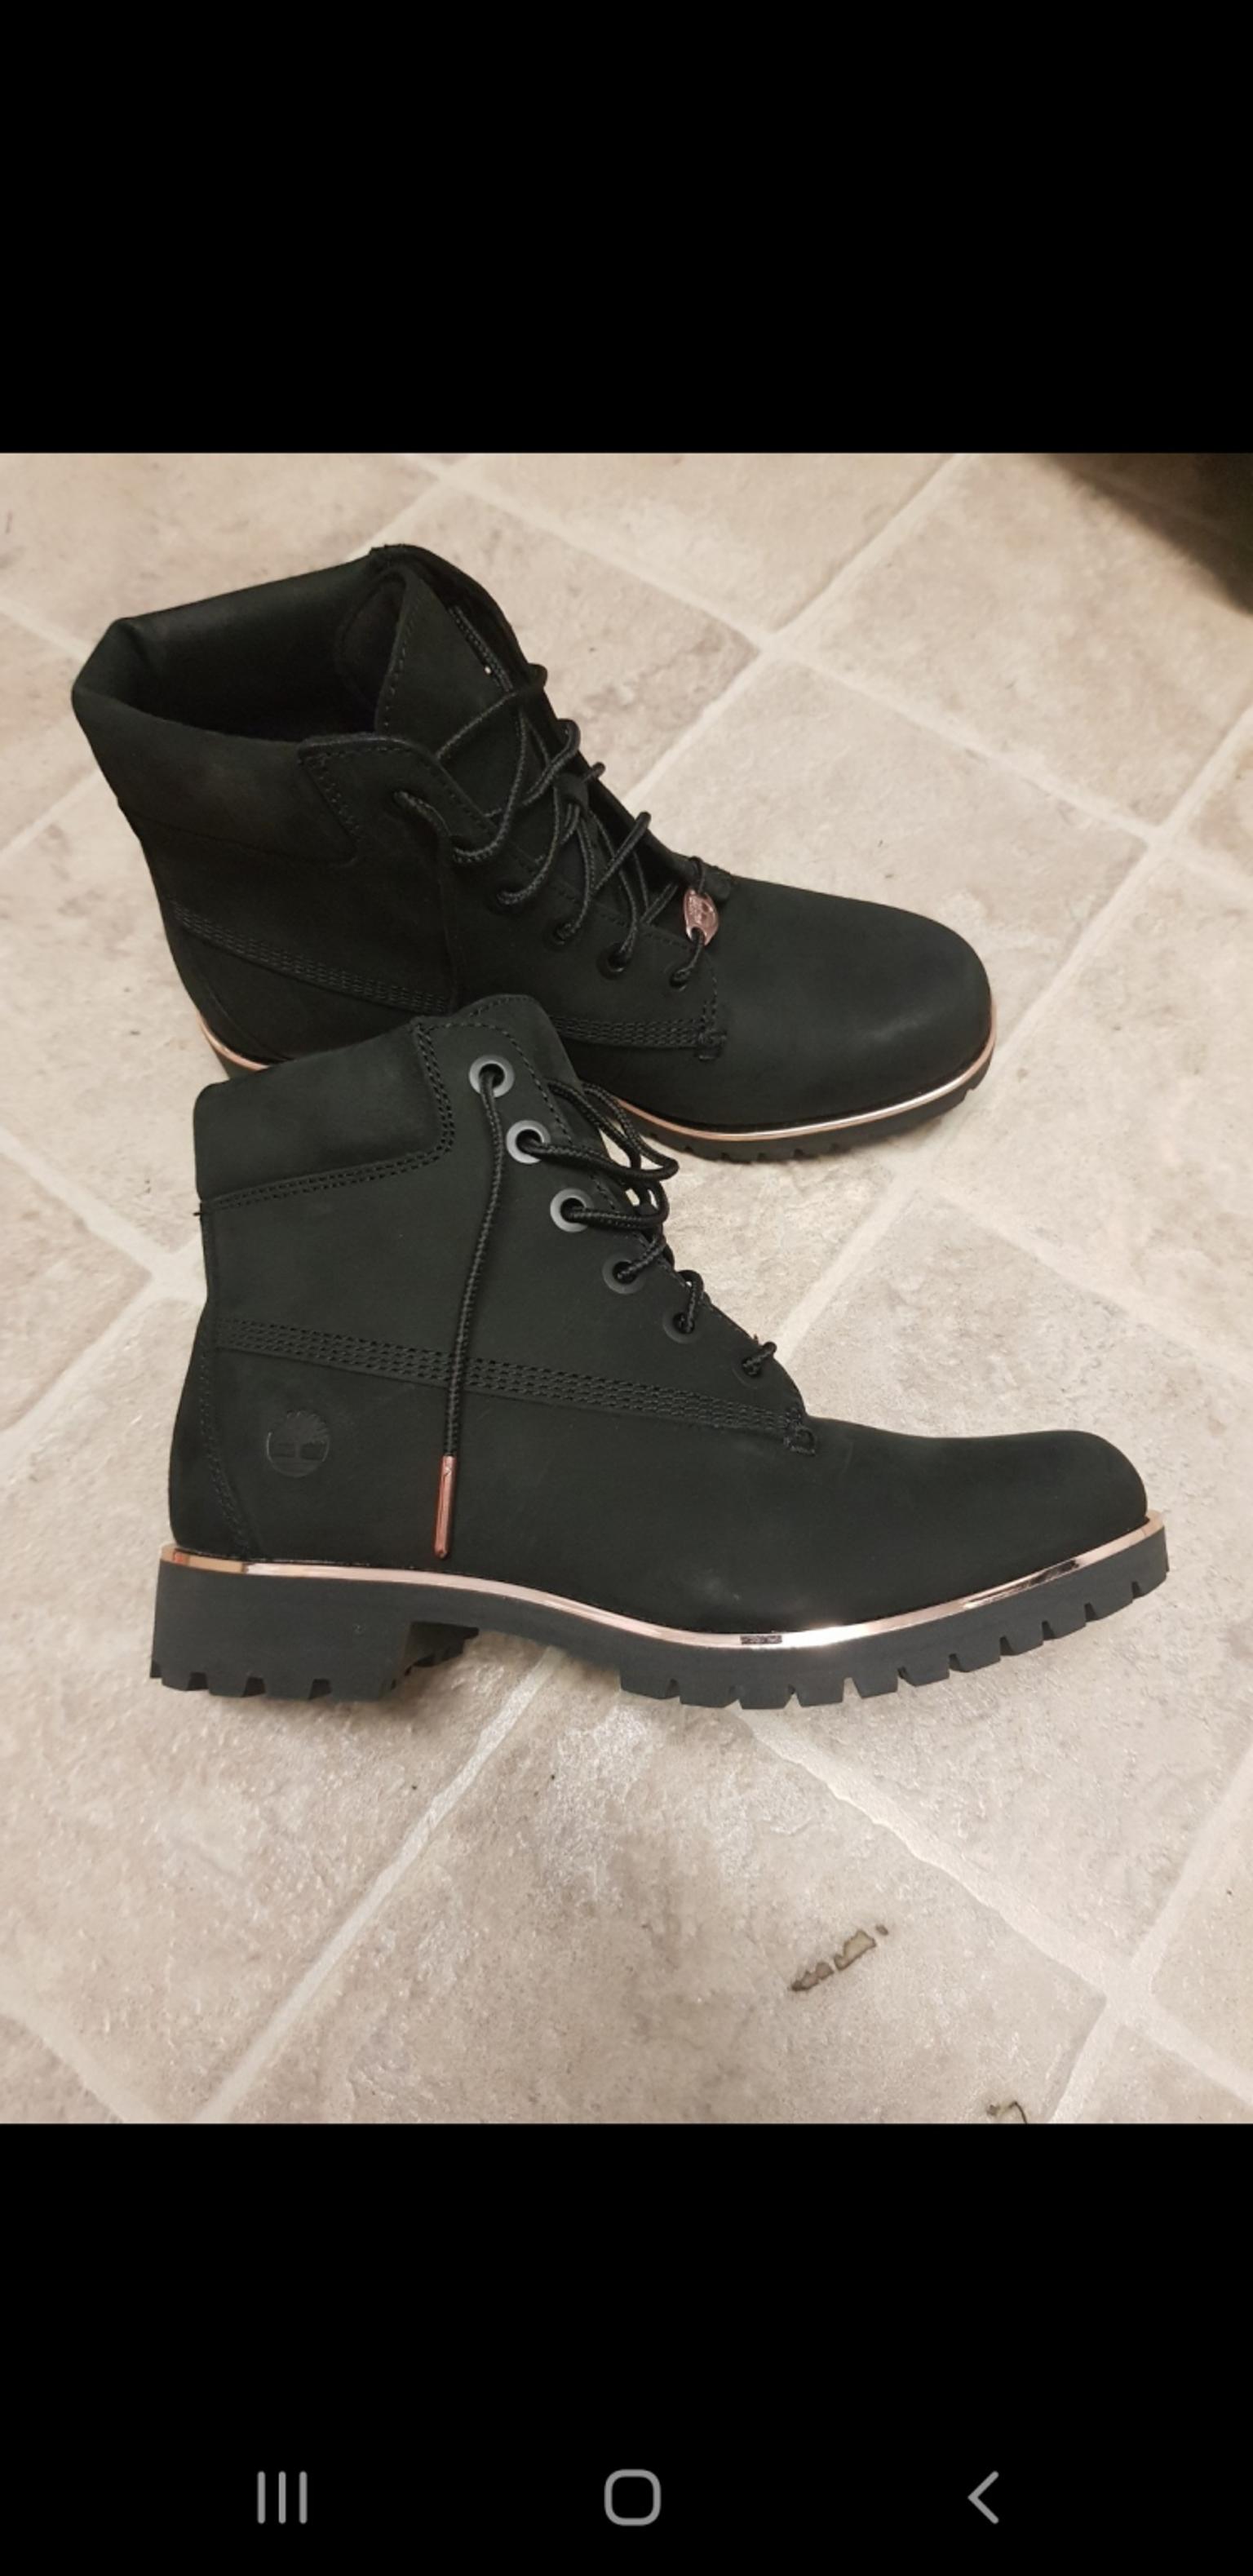 timberland rose gold boots